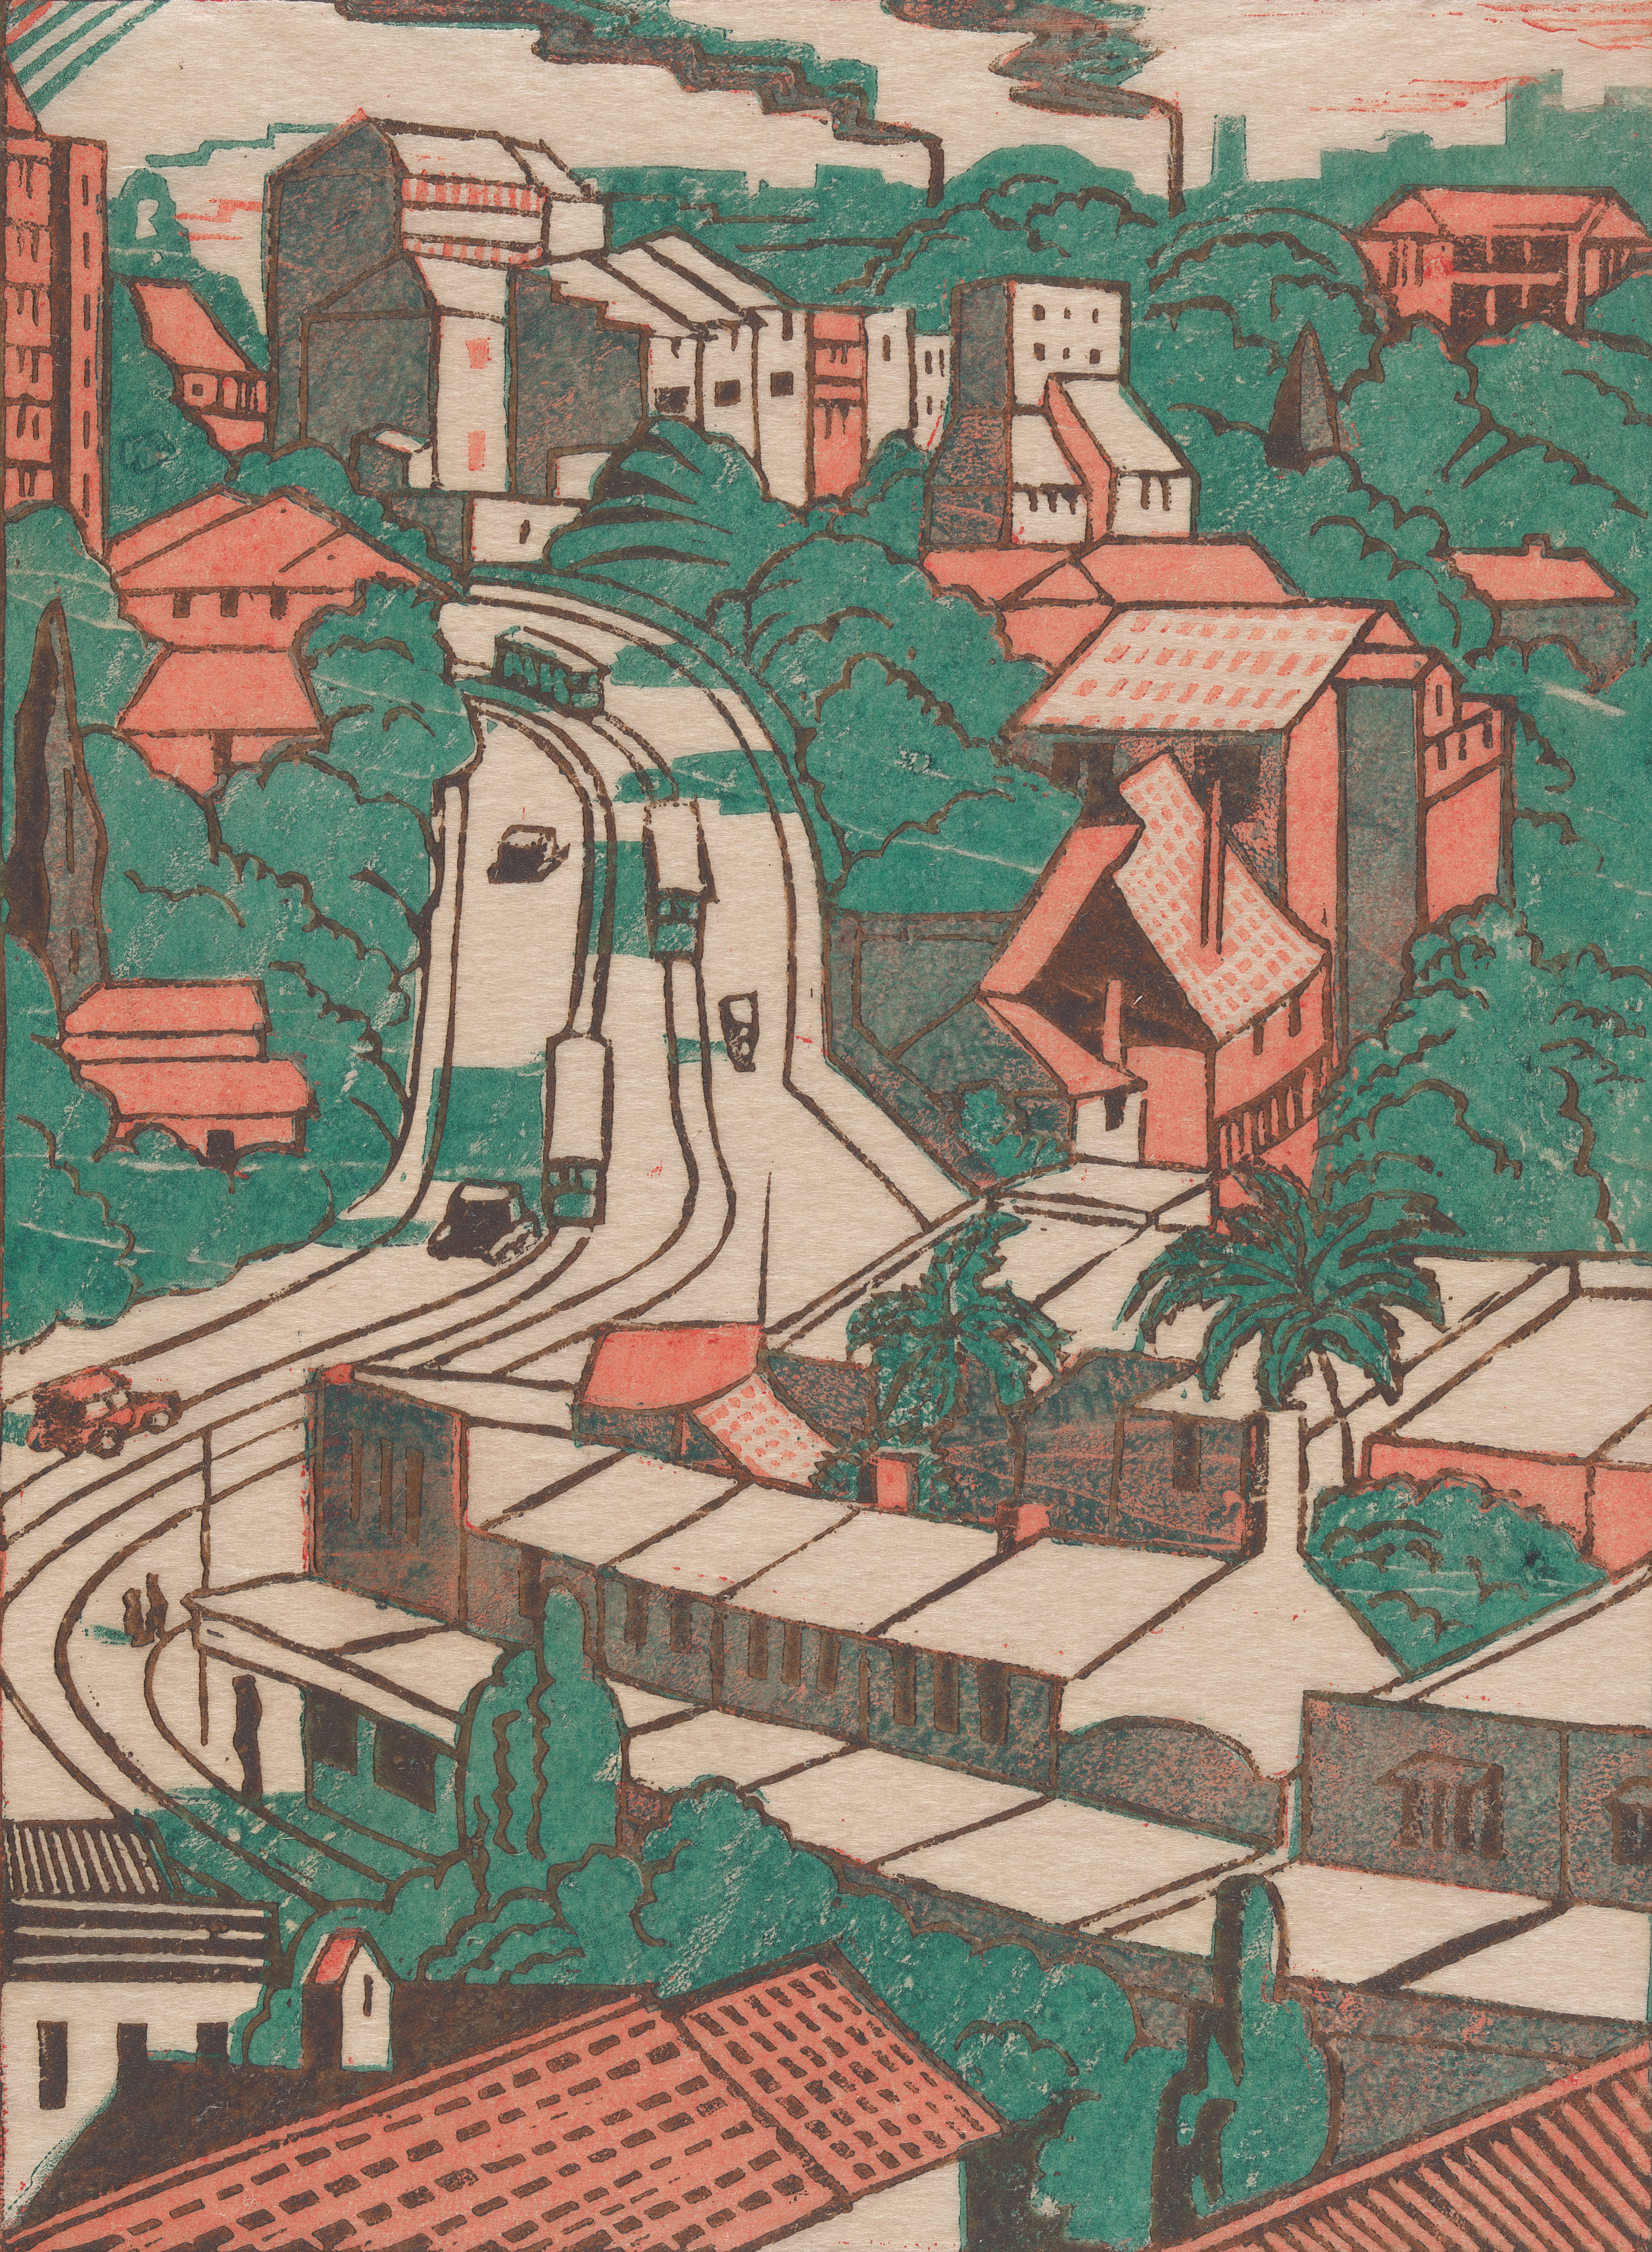 Eveline Syme, Sydney tram line, 1936, linocut, printed in colour inks, from four blocks, National Gallery of Australia, Kamberri/Canberra, purchased 1979, © Estate of Eveline Syme